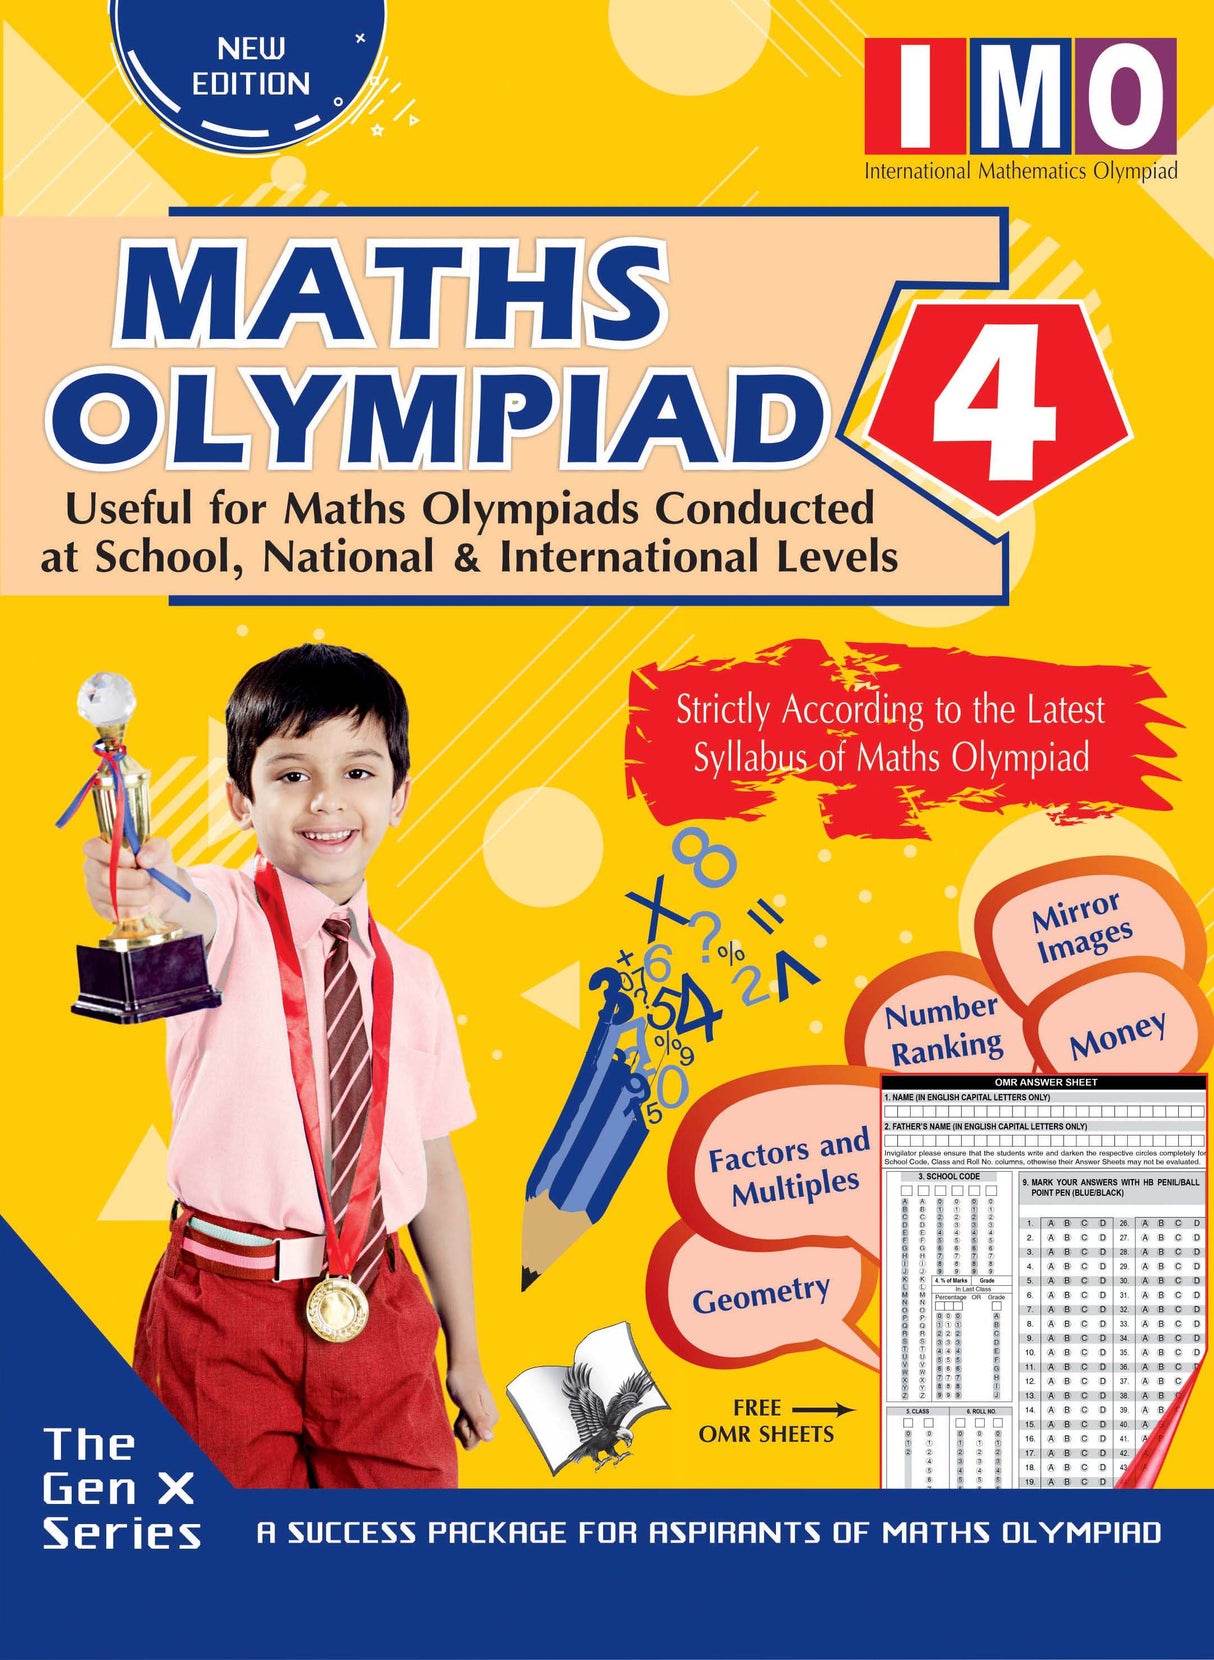 International Maths Olympiad - Class 4 (With OMR Sheets): Theories with examples, MCQs & solutions, Previous questions, Model test papers